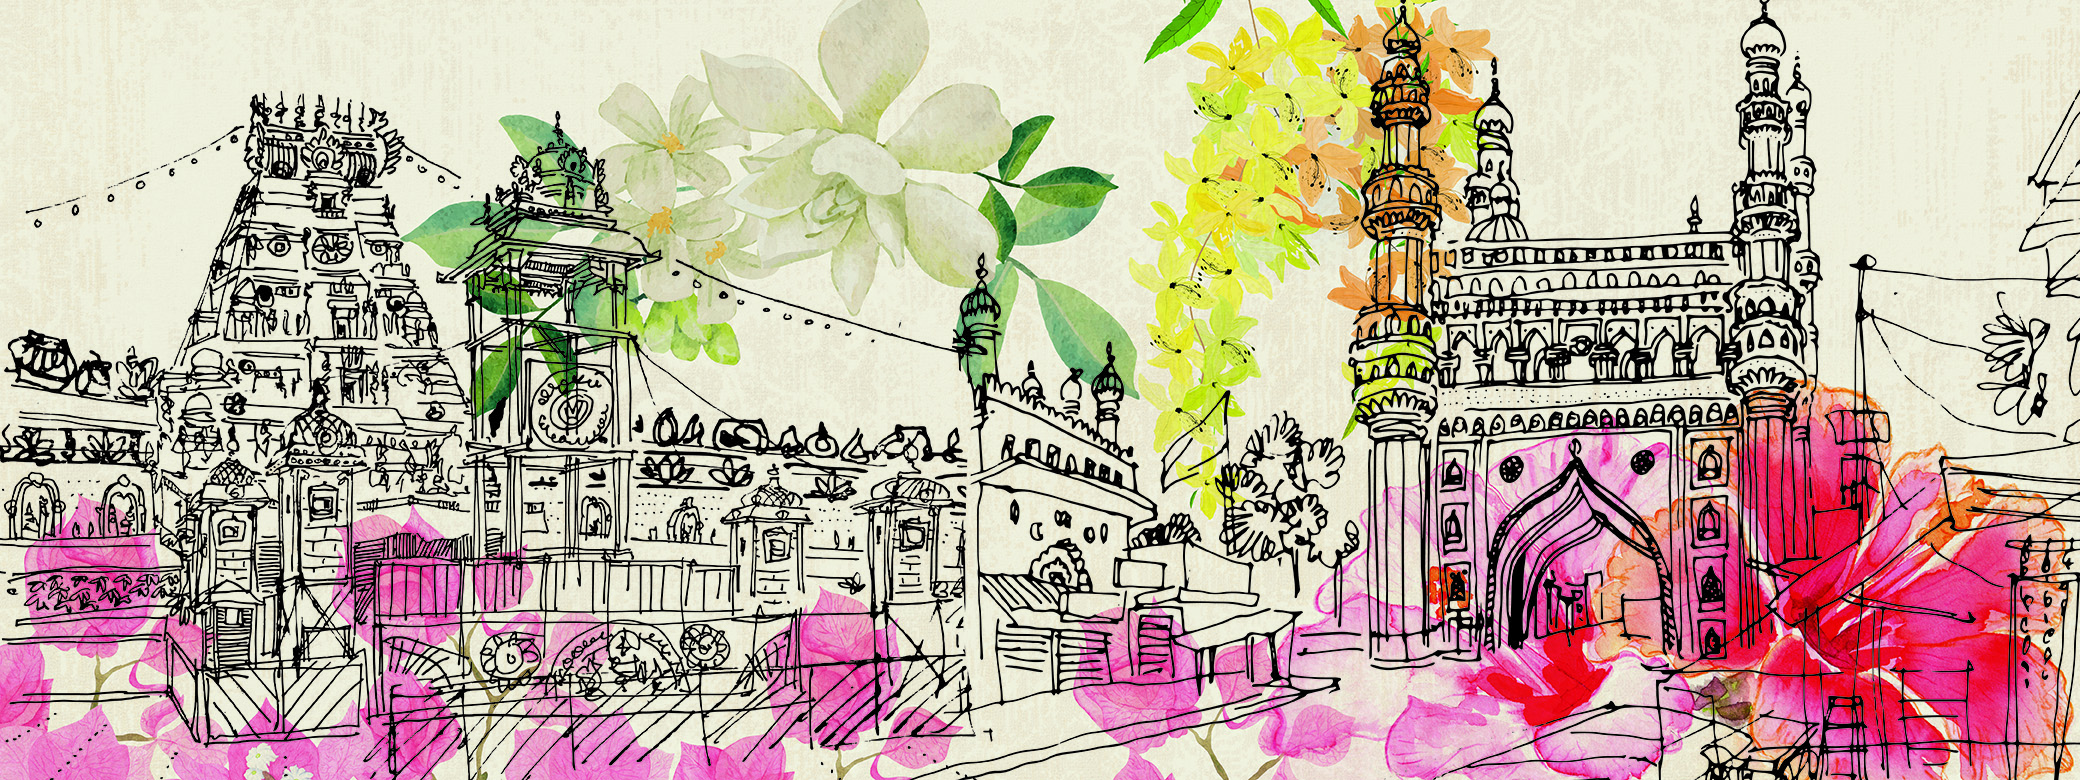 An illustrated collage of Indian buildings, flowers, and iconography